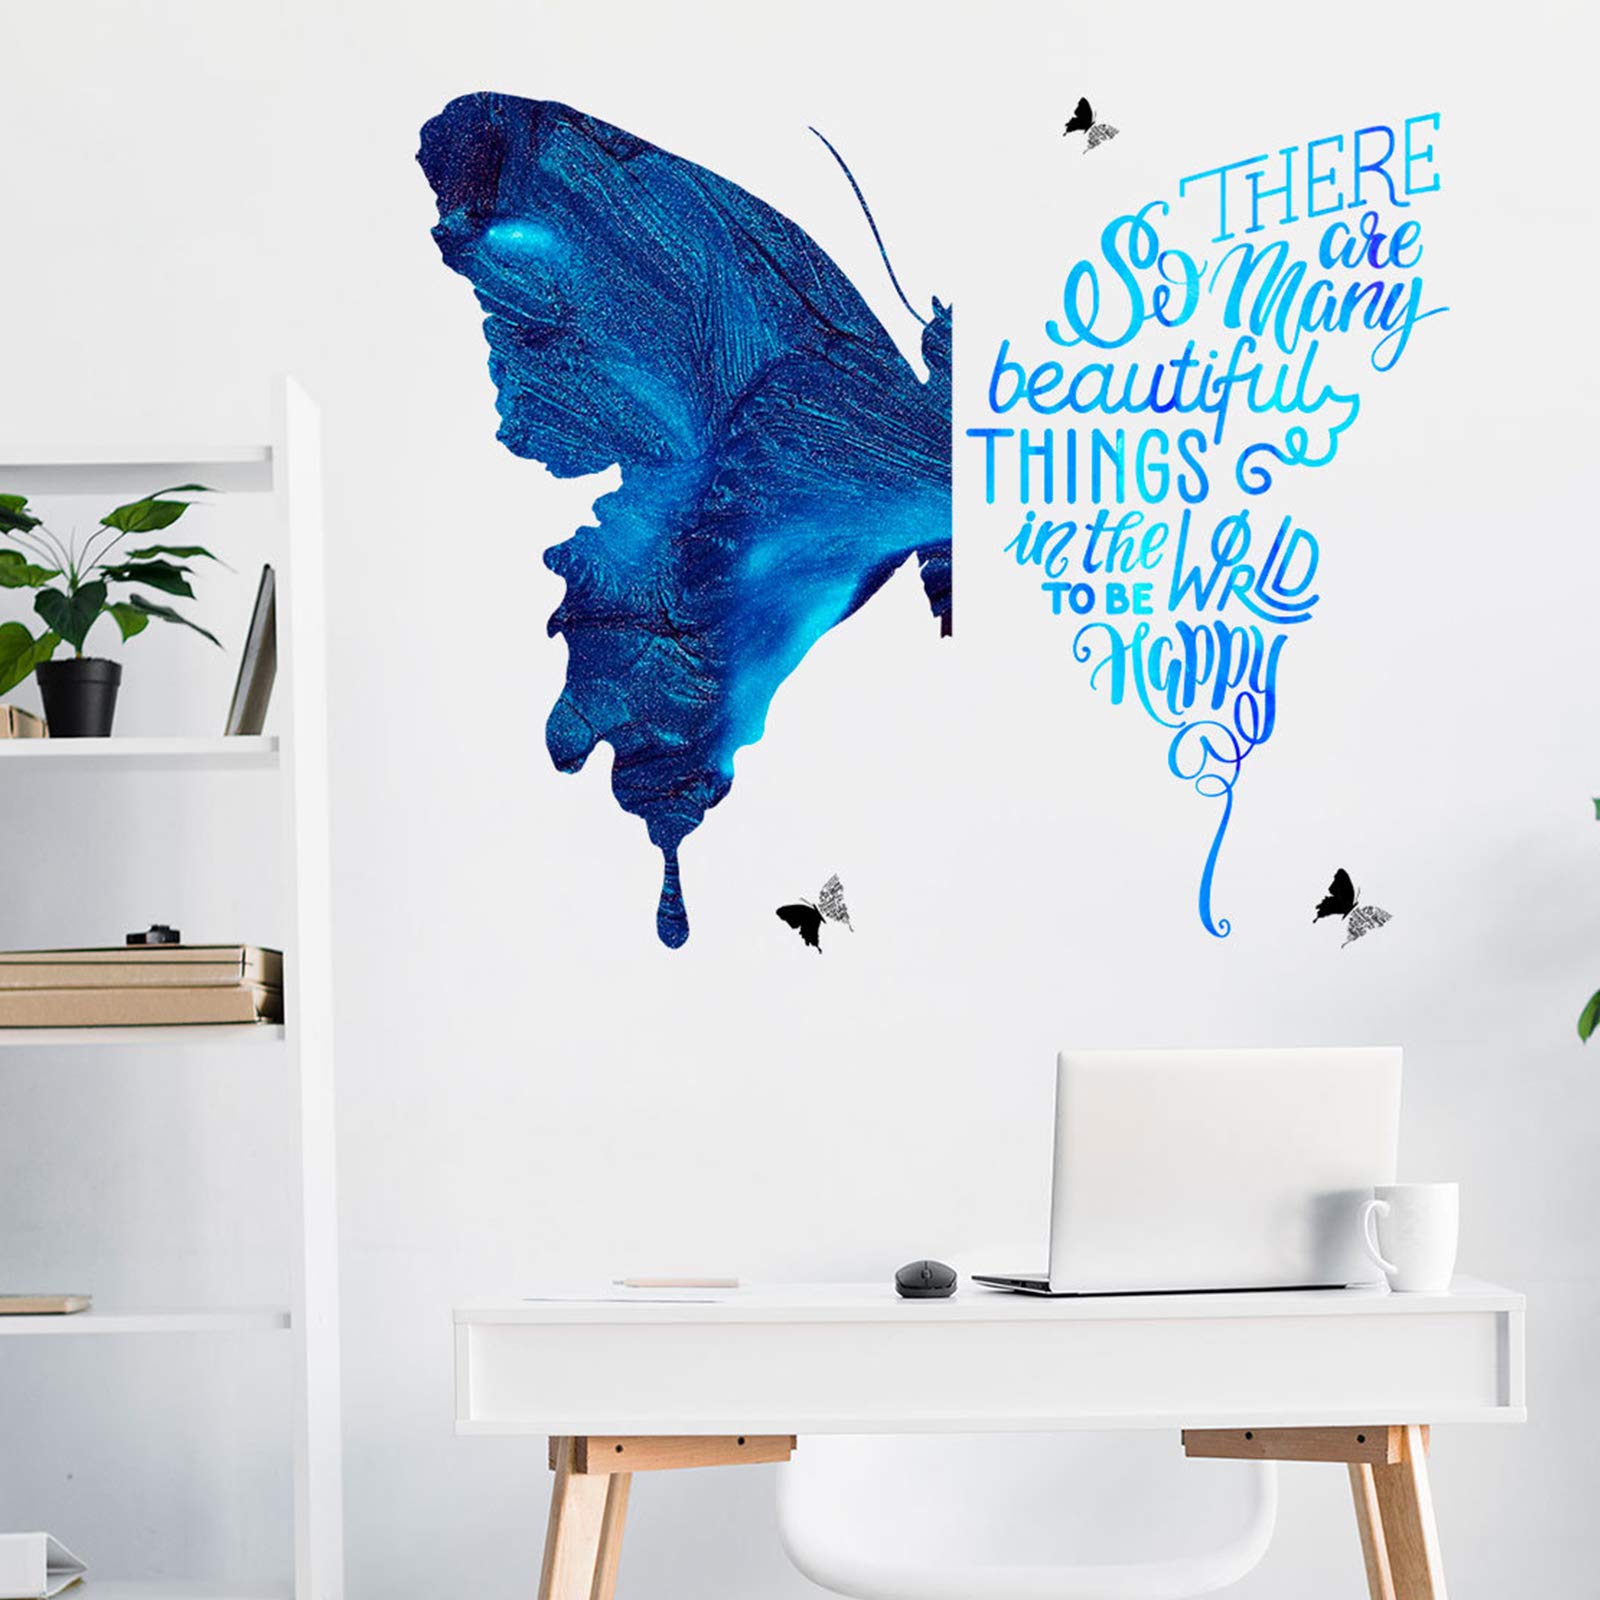 Inspirational Butterfly Quotes Wallpapers